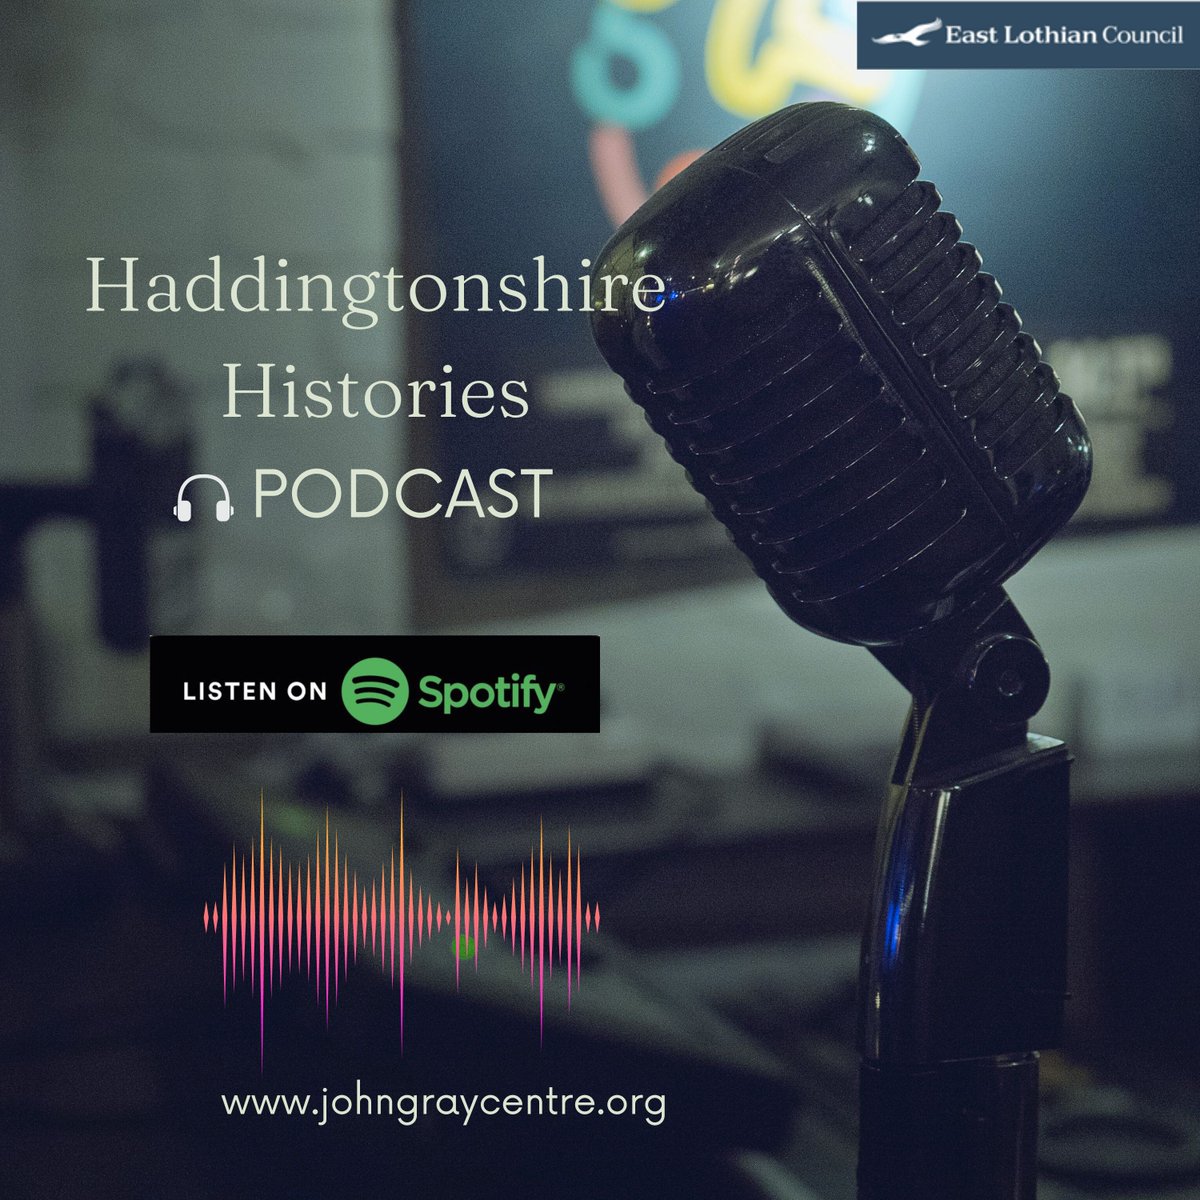 📢HADDINGTONSHIRE HISTORIES PODCAST IS BACK! SEASON 3 begins with bite-sized episodes of the Remarkable Women Series.🎙️ Listen on Spotify or visit the following link: anchor.fm/haddingtonshir…. @eastlothianlibs @ELCouncil #EastLothian #LocalHistoryMatters